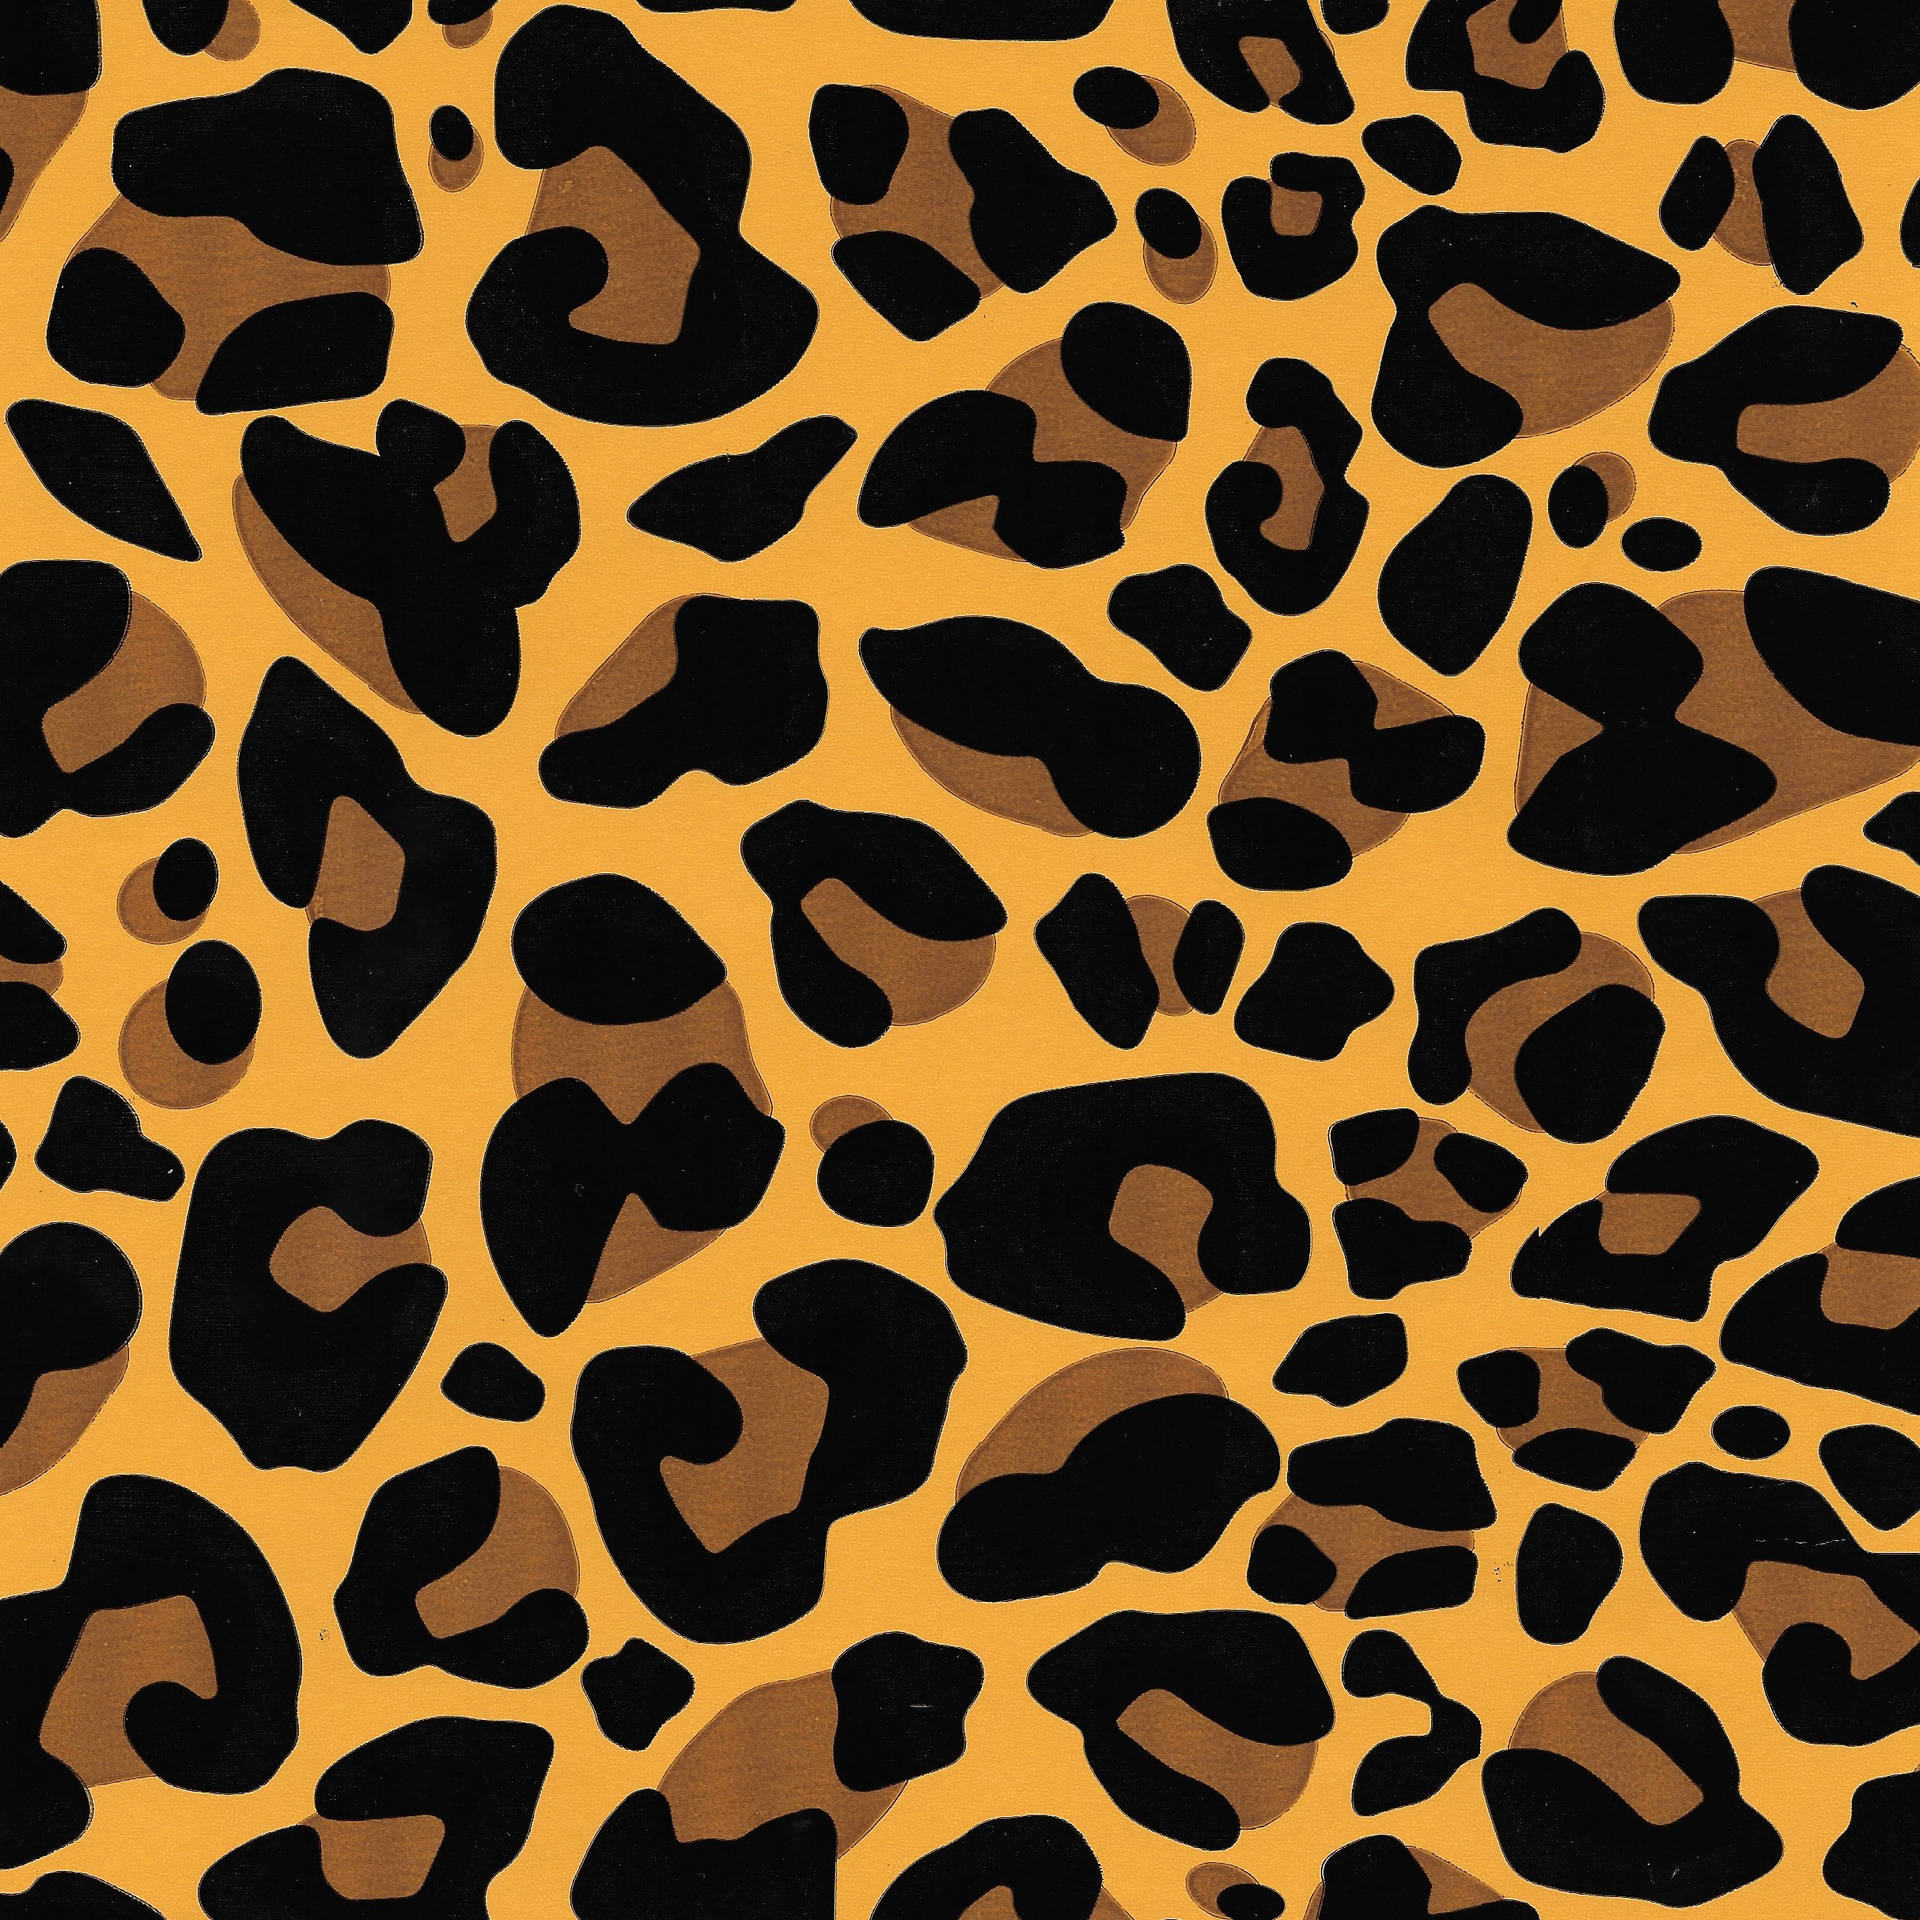 Leopard Print 2427X2427 Wallpaper and Background Image